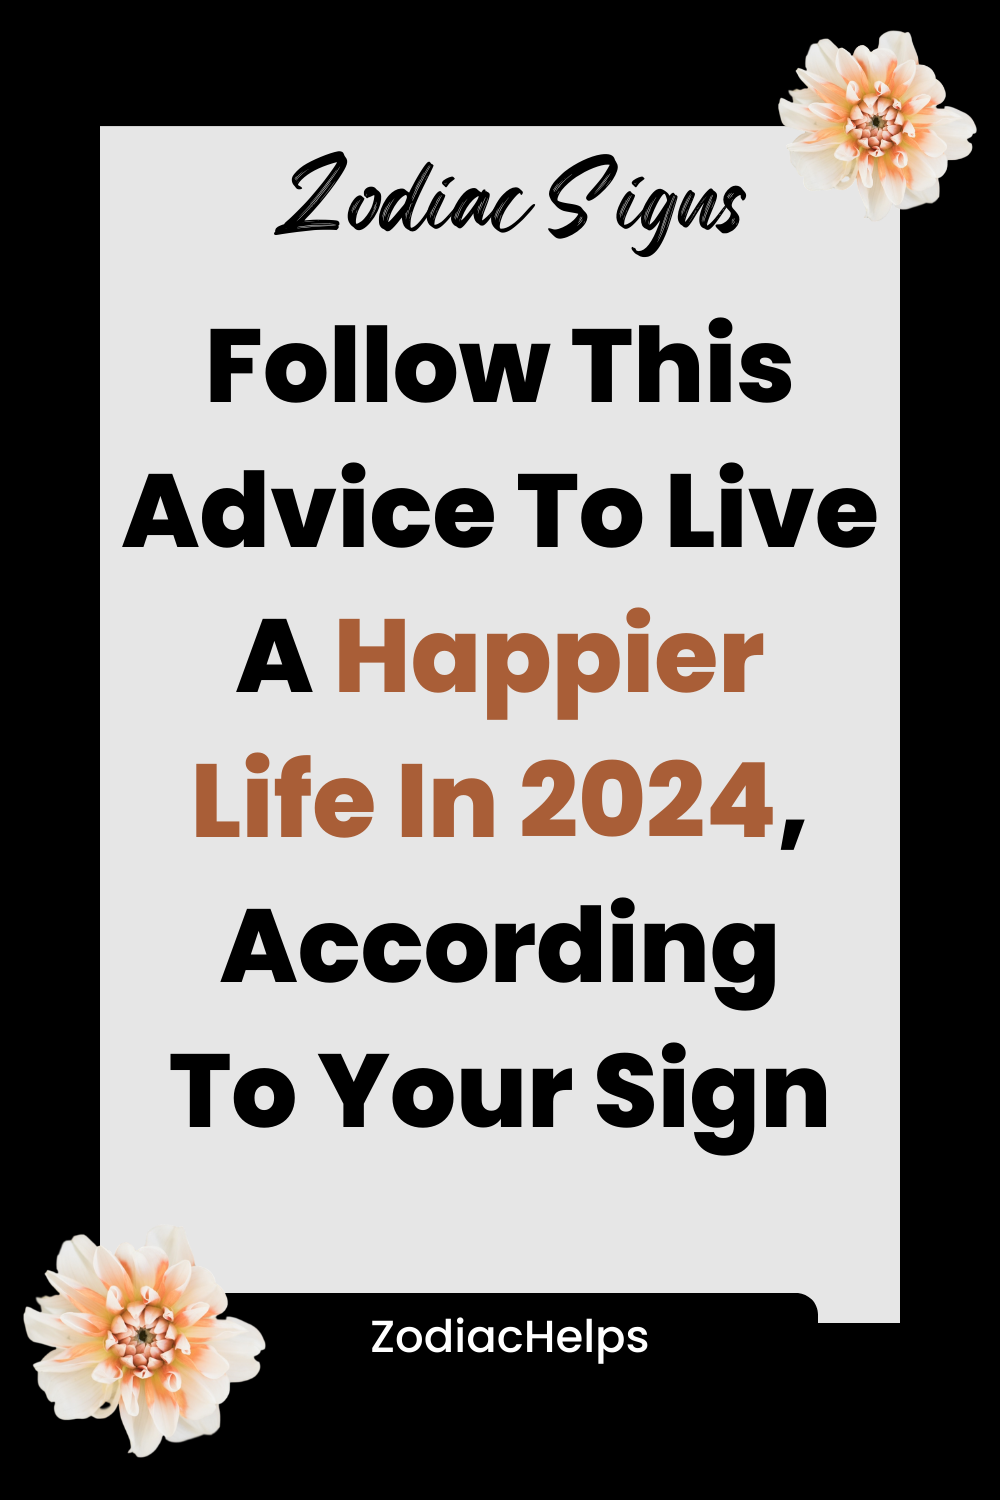 Follow This Advice To Live A Happier Life In 2024, According To Your Sign